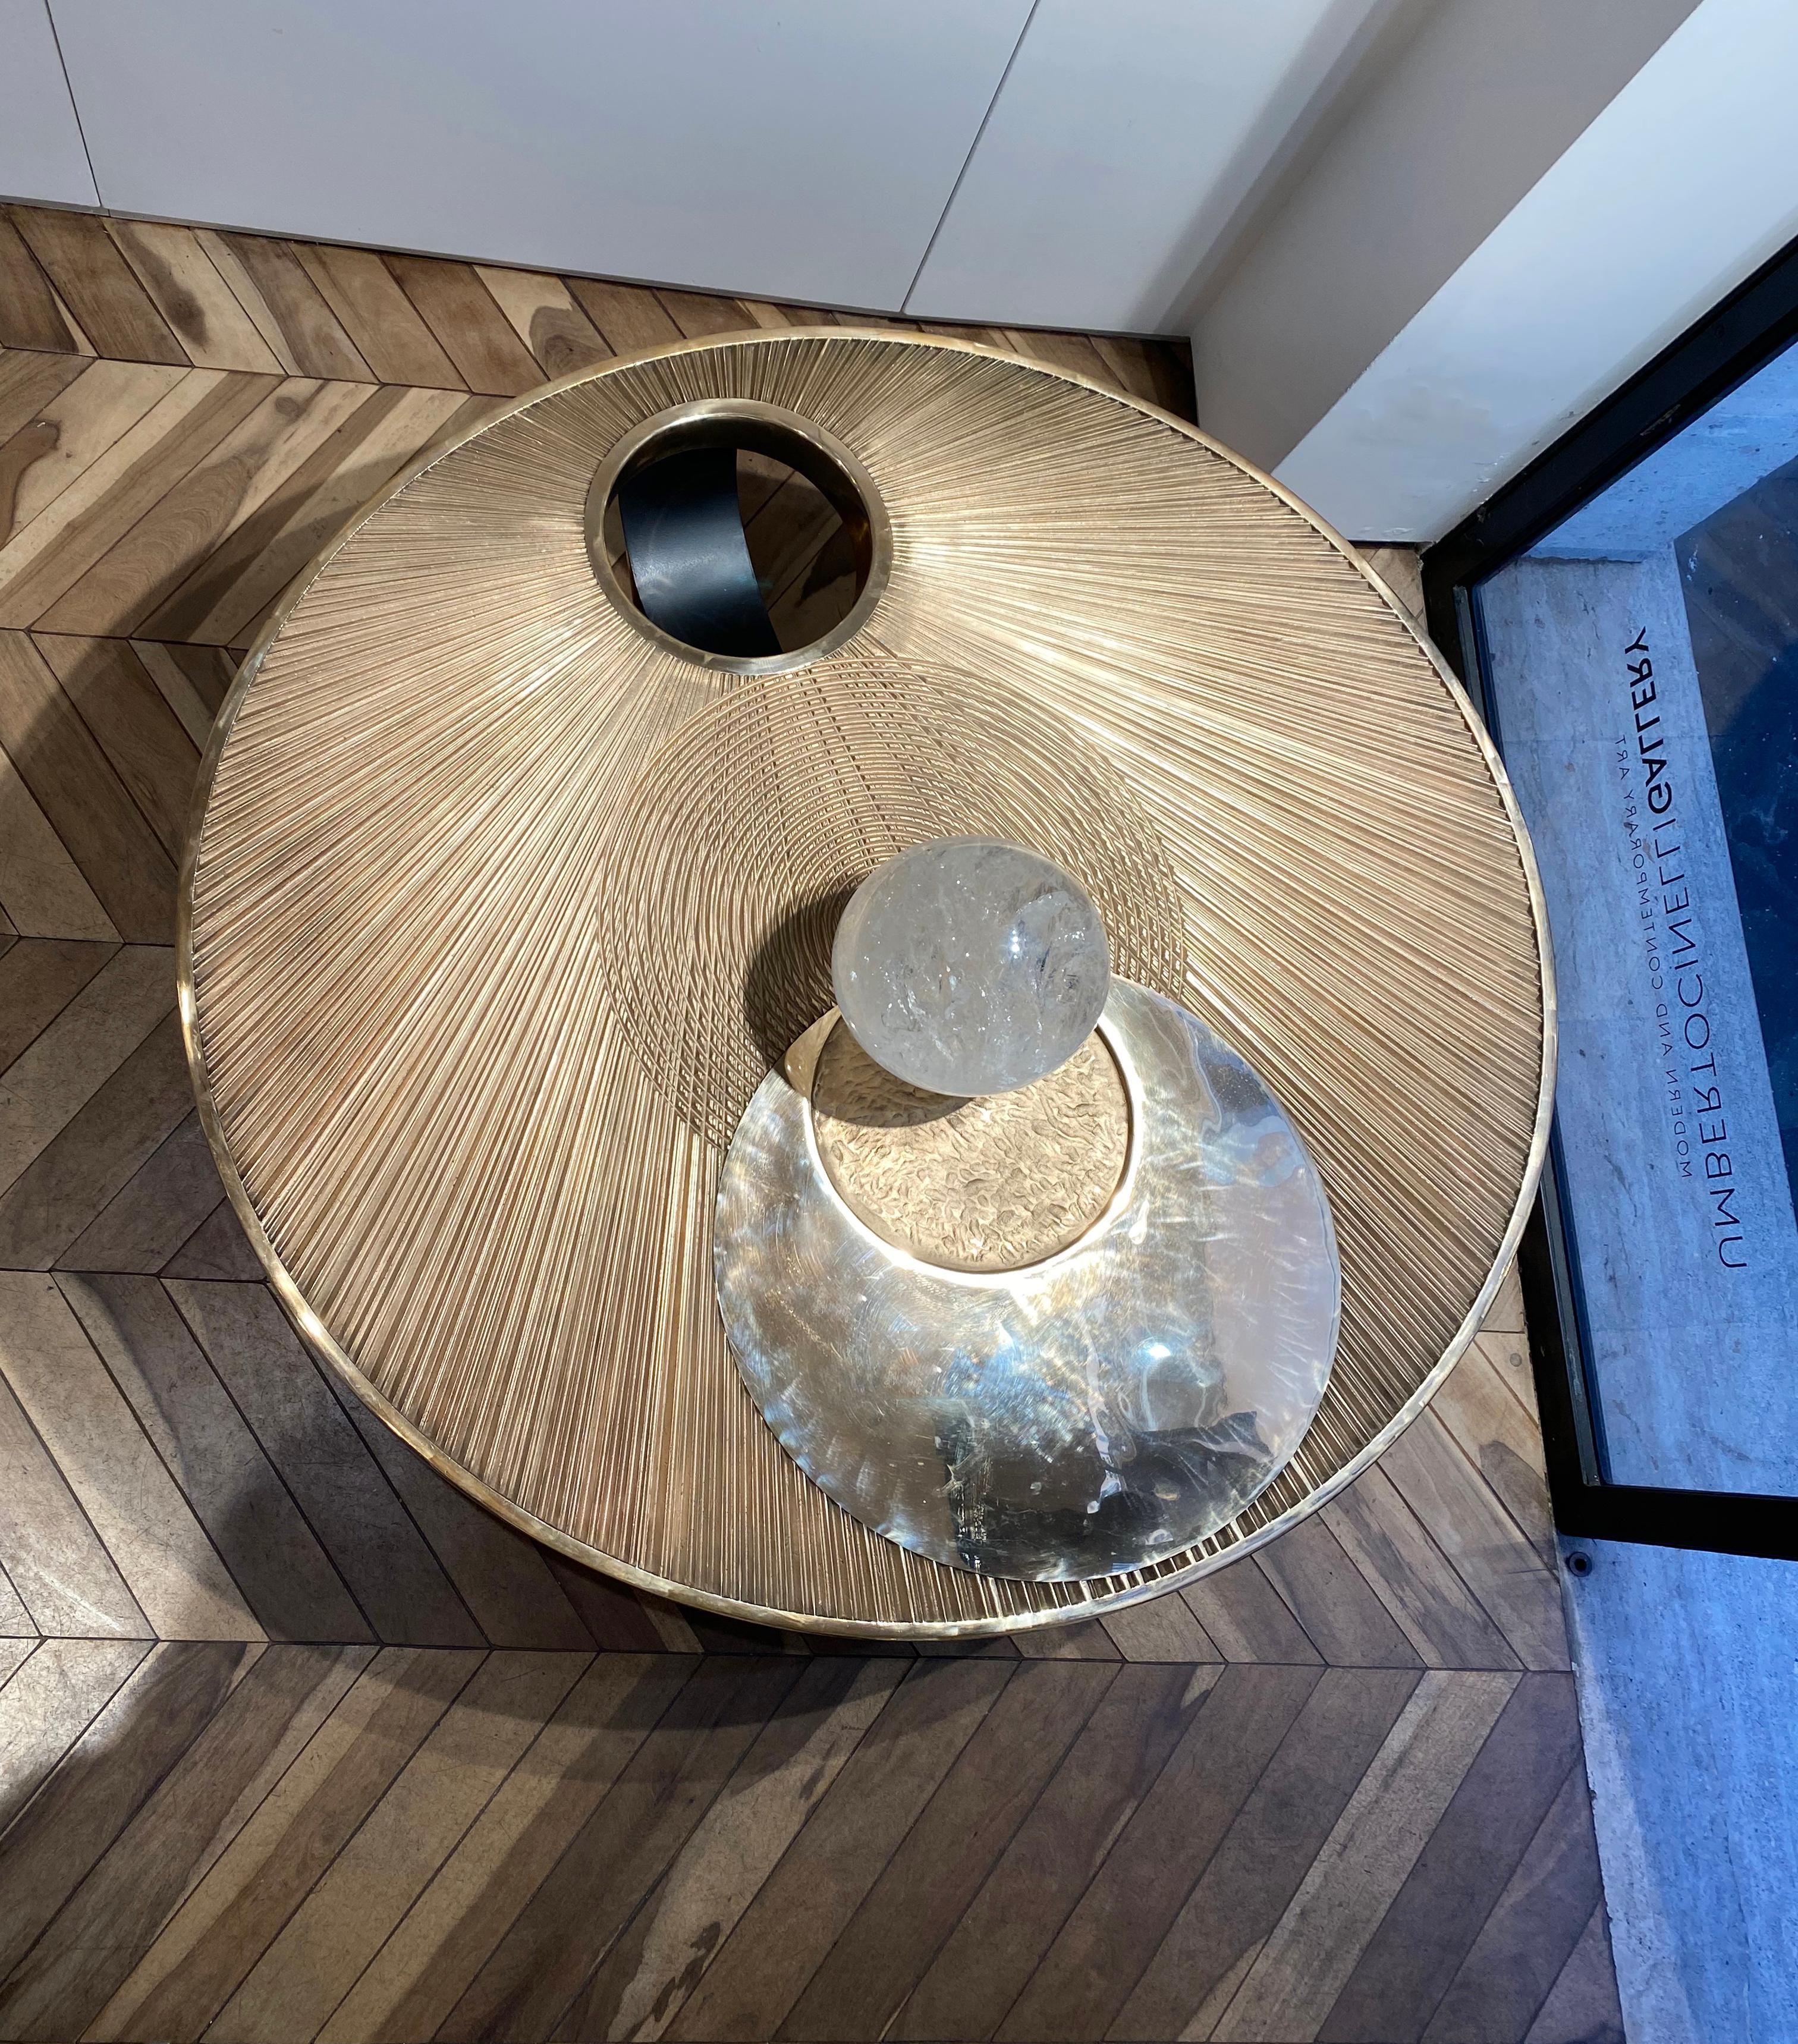 Artistic casted Rose bronze coffee table. 
The engraved detailed round top represents the solar eclipse of year 2014, where the sun met the moon, that ideally kiss each other.
With this platonic and romantic idea the Italian artist Umberto Cinelli